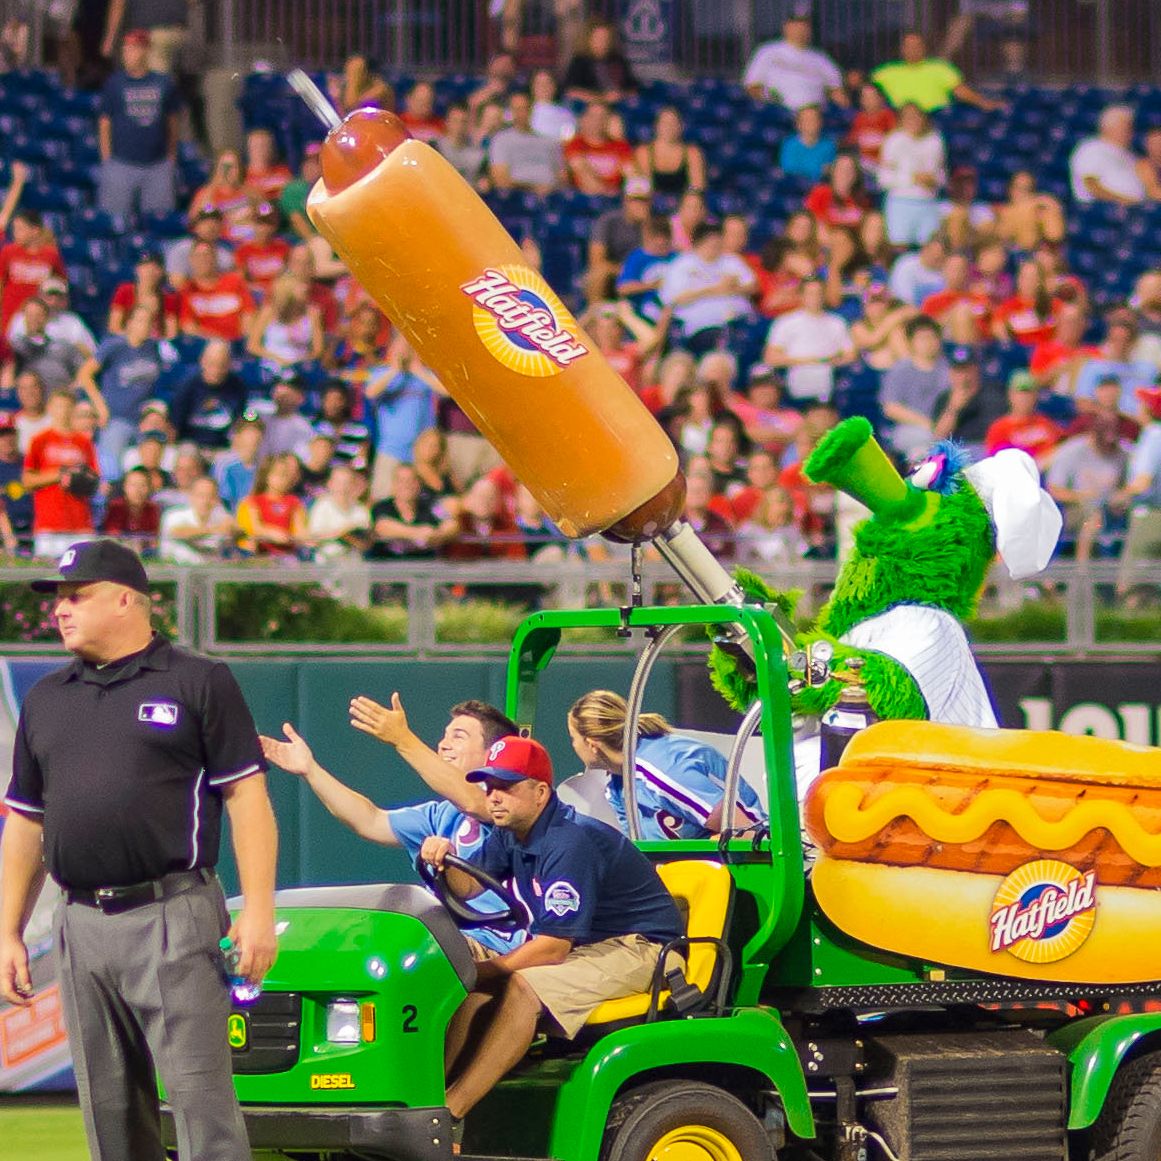 Philadelphia Phillies fan hospitalized by flying hot dog launched by  Phanatic, MLB